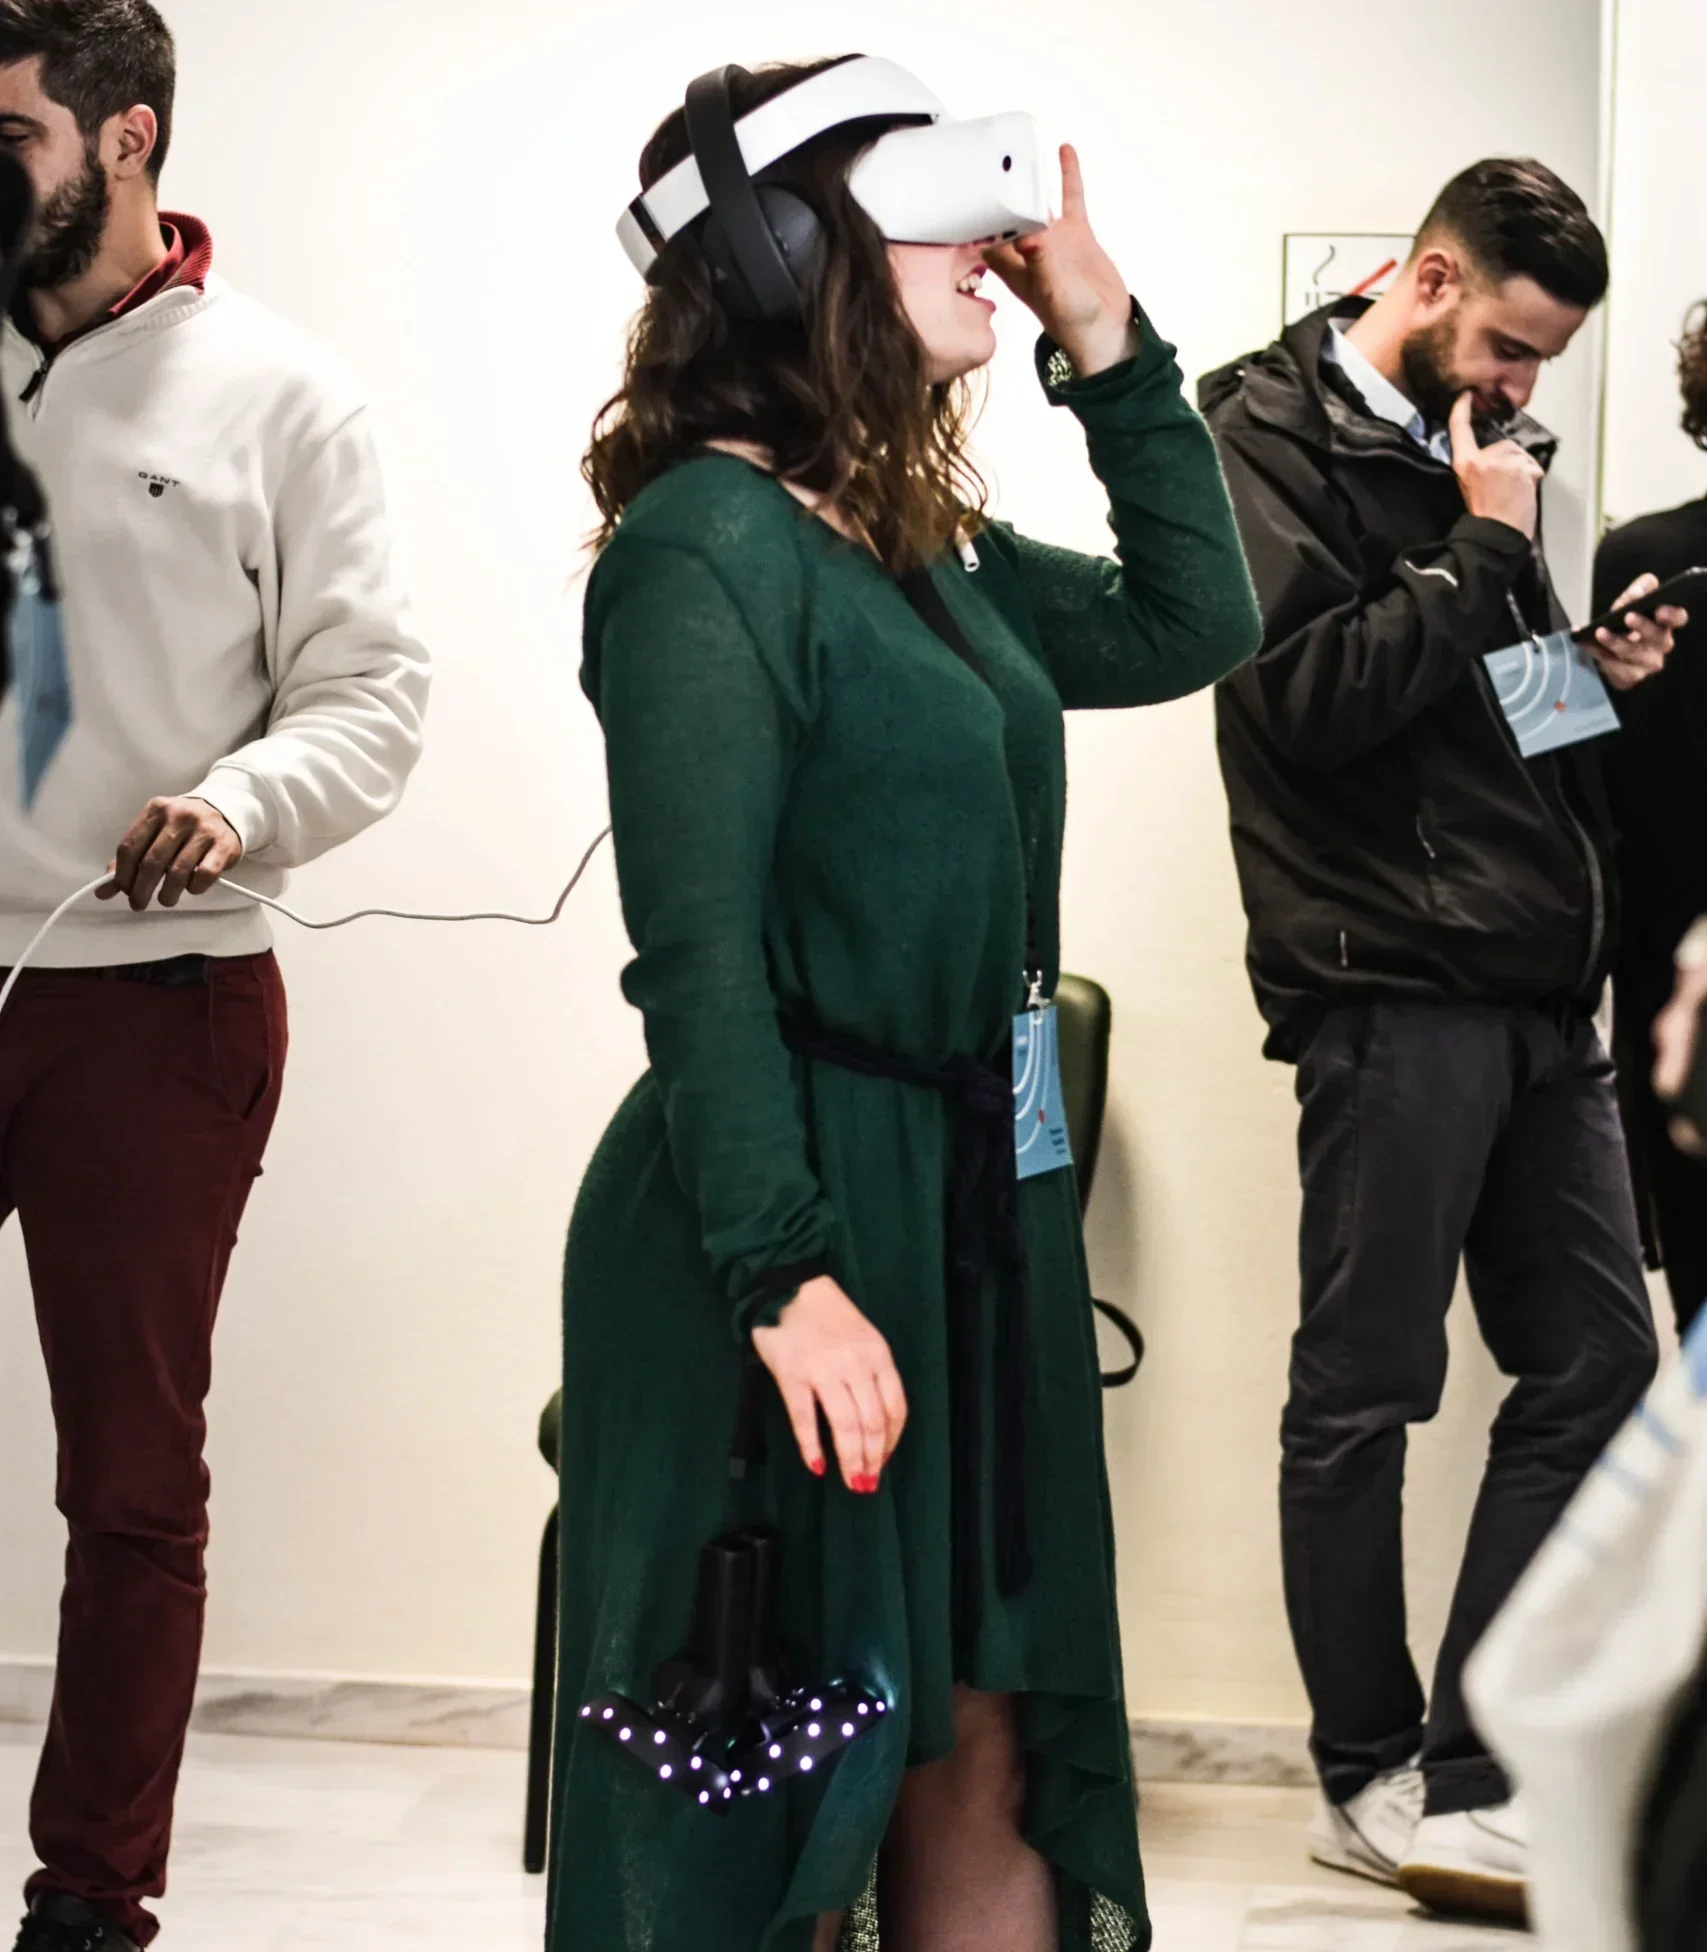 A woman at a virtual reality exhibit, exploring content through a VR headset and headphones.